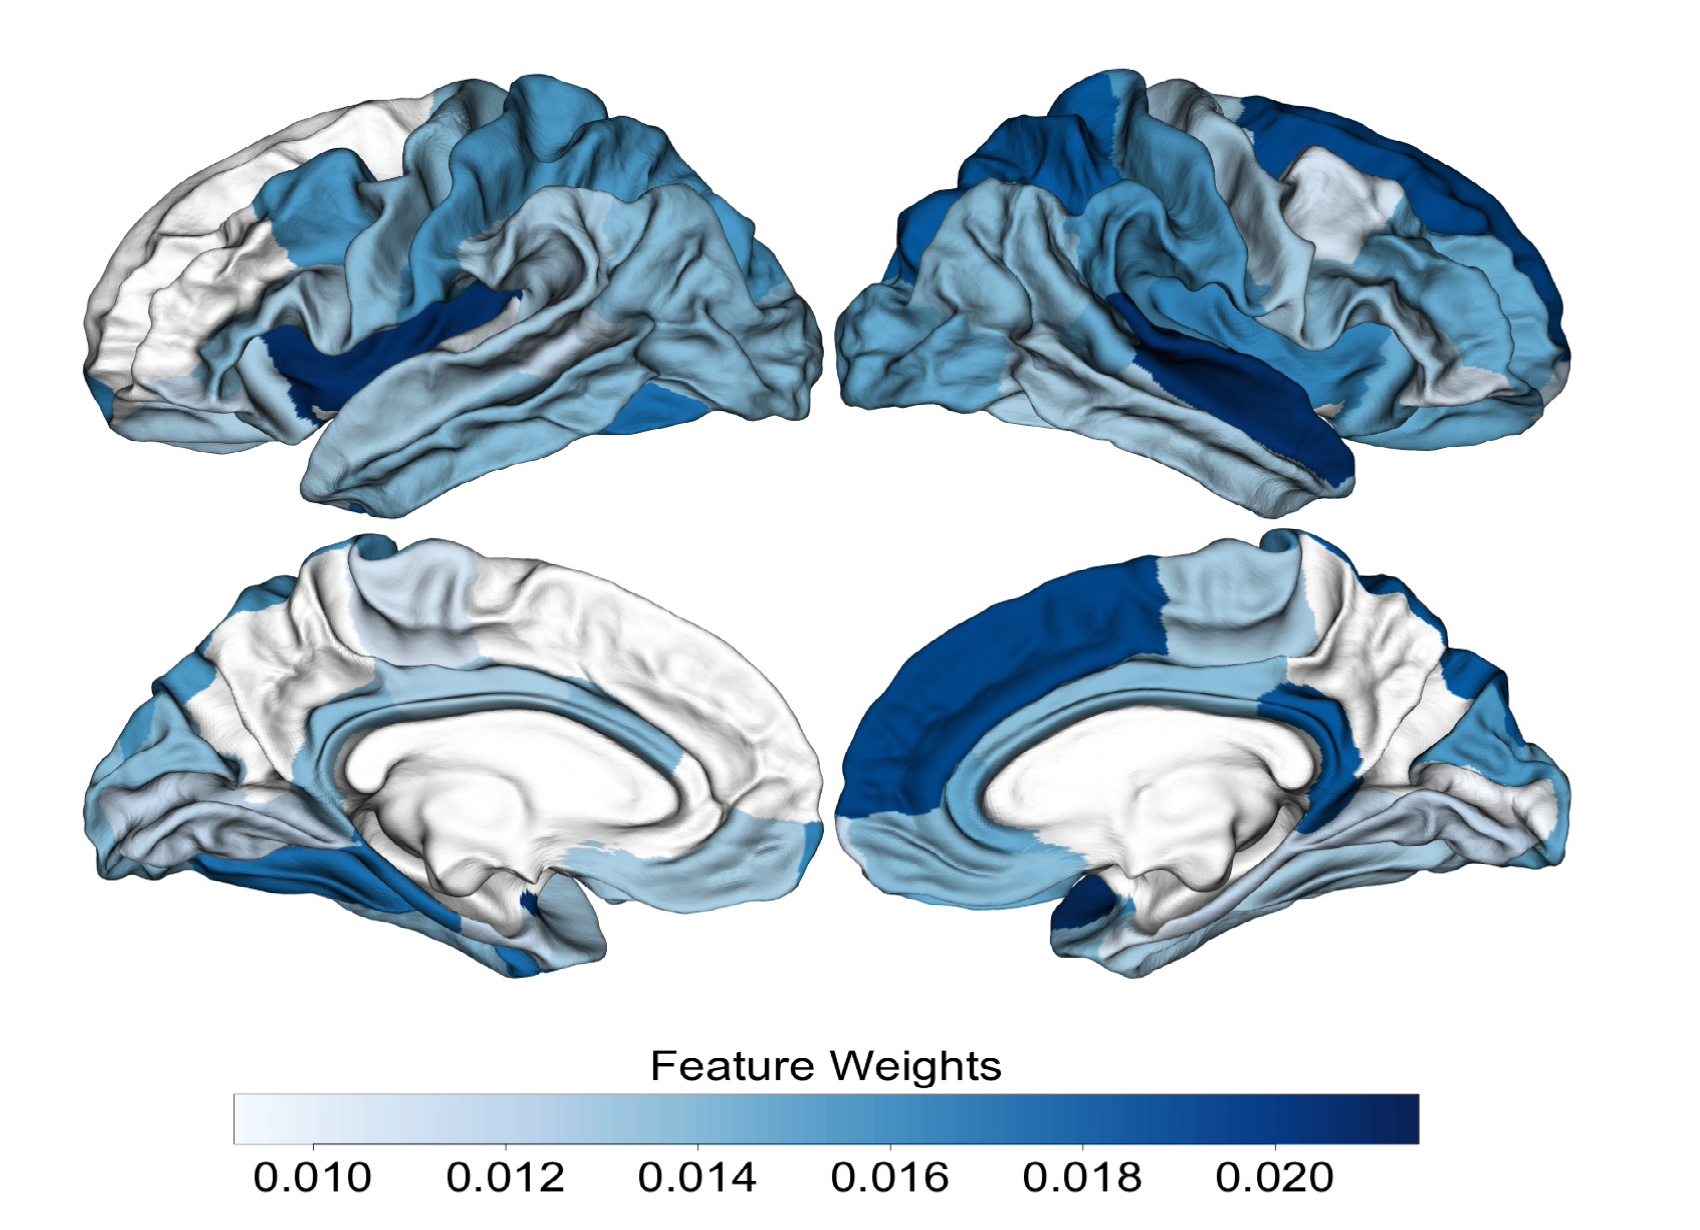 Image from paper showing different imporantance of brain regions for the paper, marked by different shades of blue.